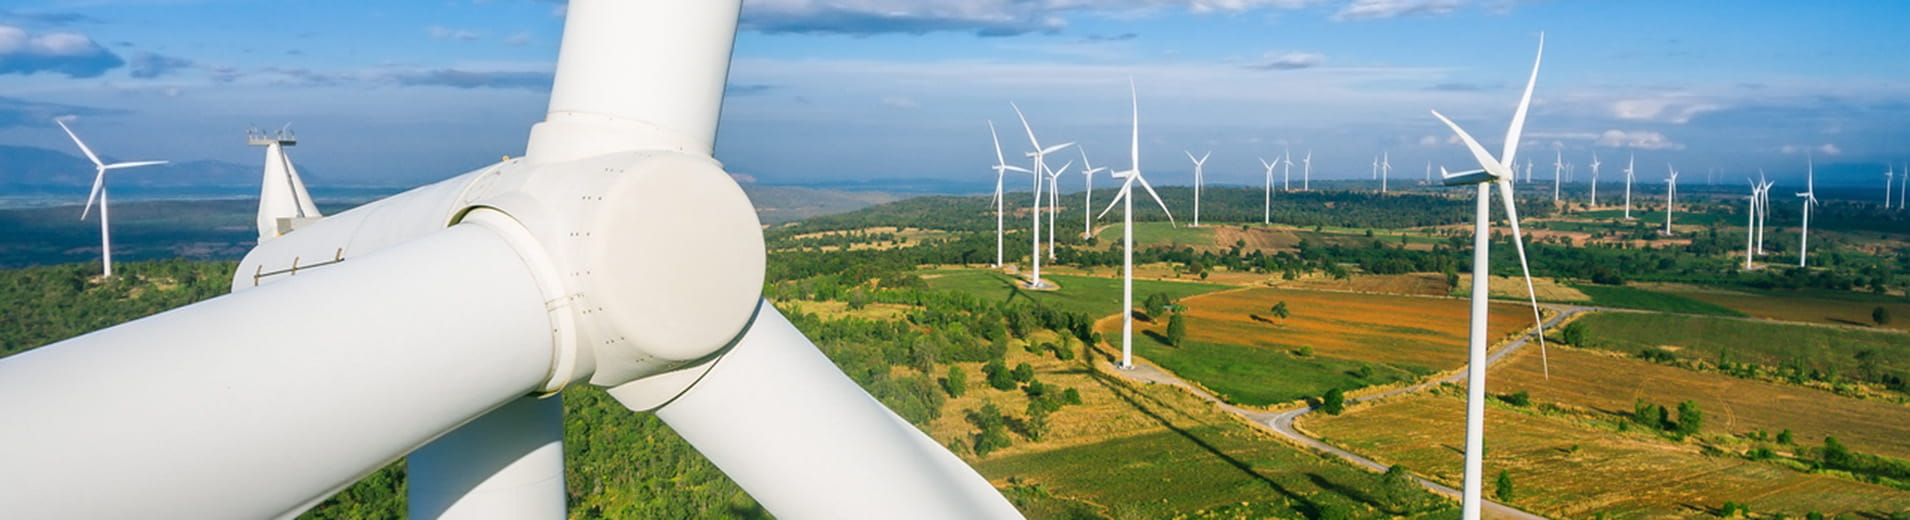 Wind_turbine_from_aerial_view_S_0844